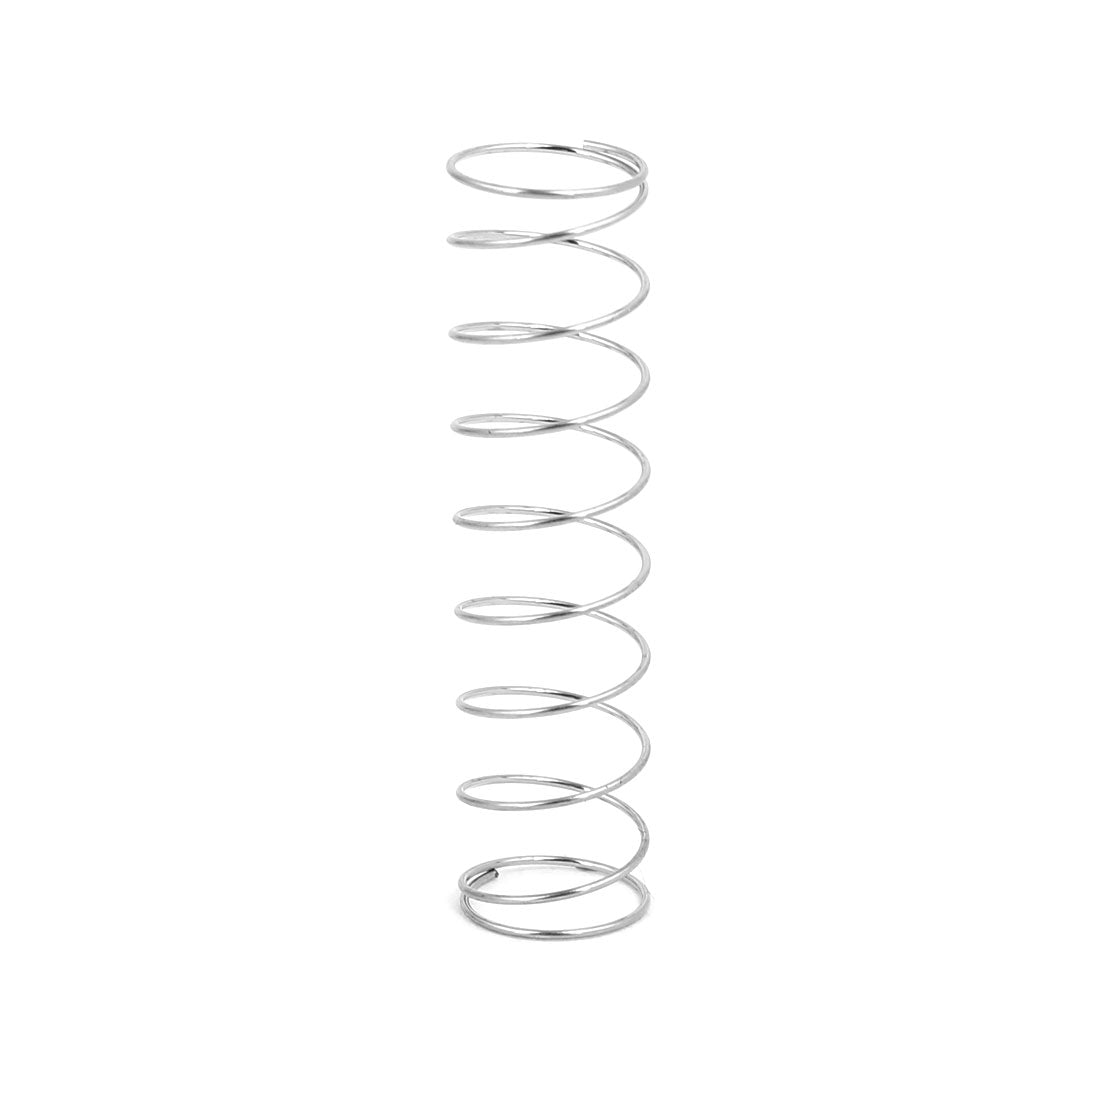 uxcell Uxcell 0.5mmx10mmx40mm 304 Stainless Steel Compression Springs 10pcs